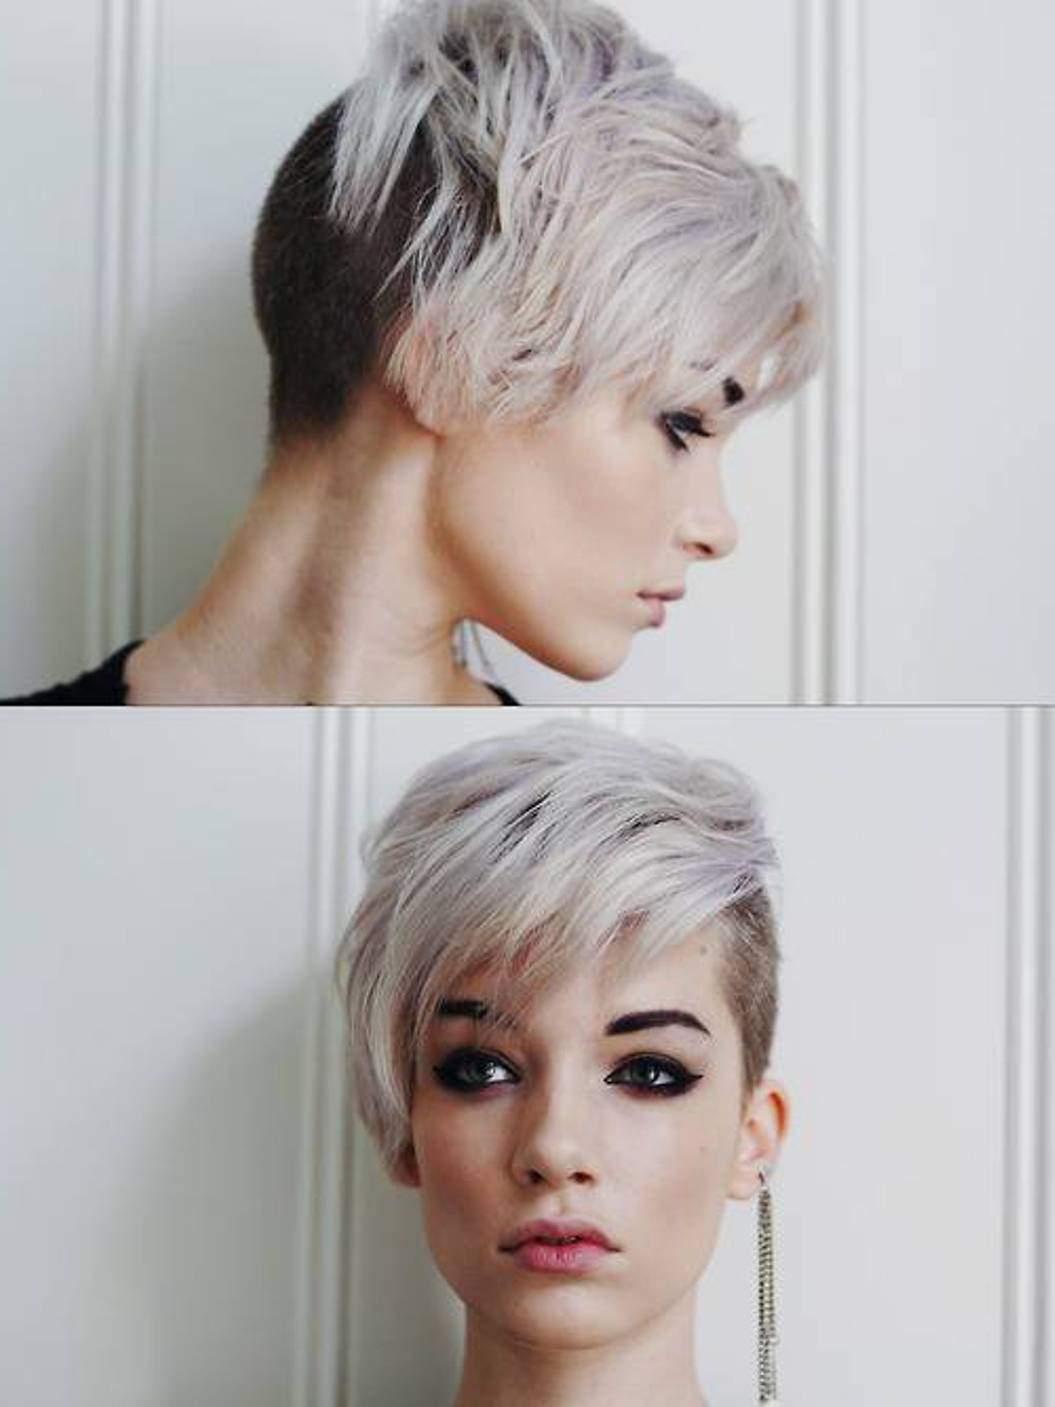 Hairstyles For Short Hair With One Side Shaved